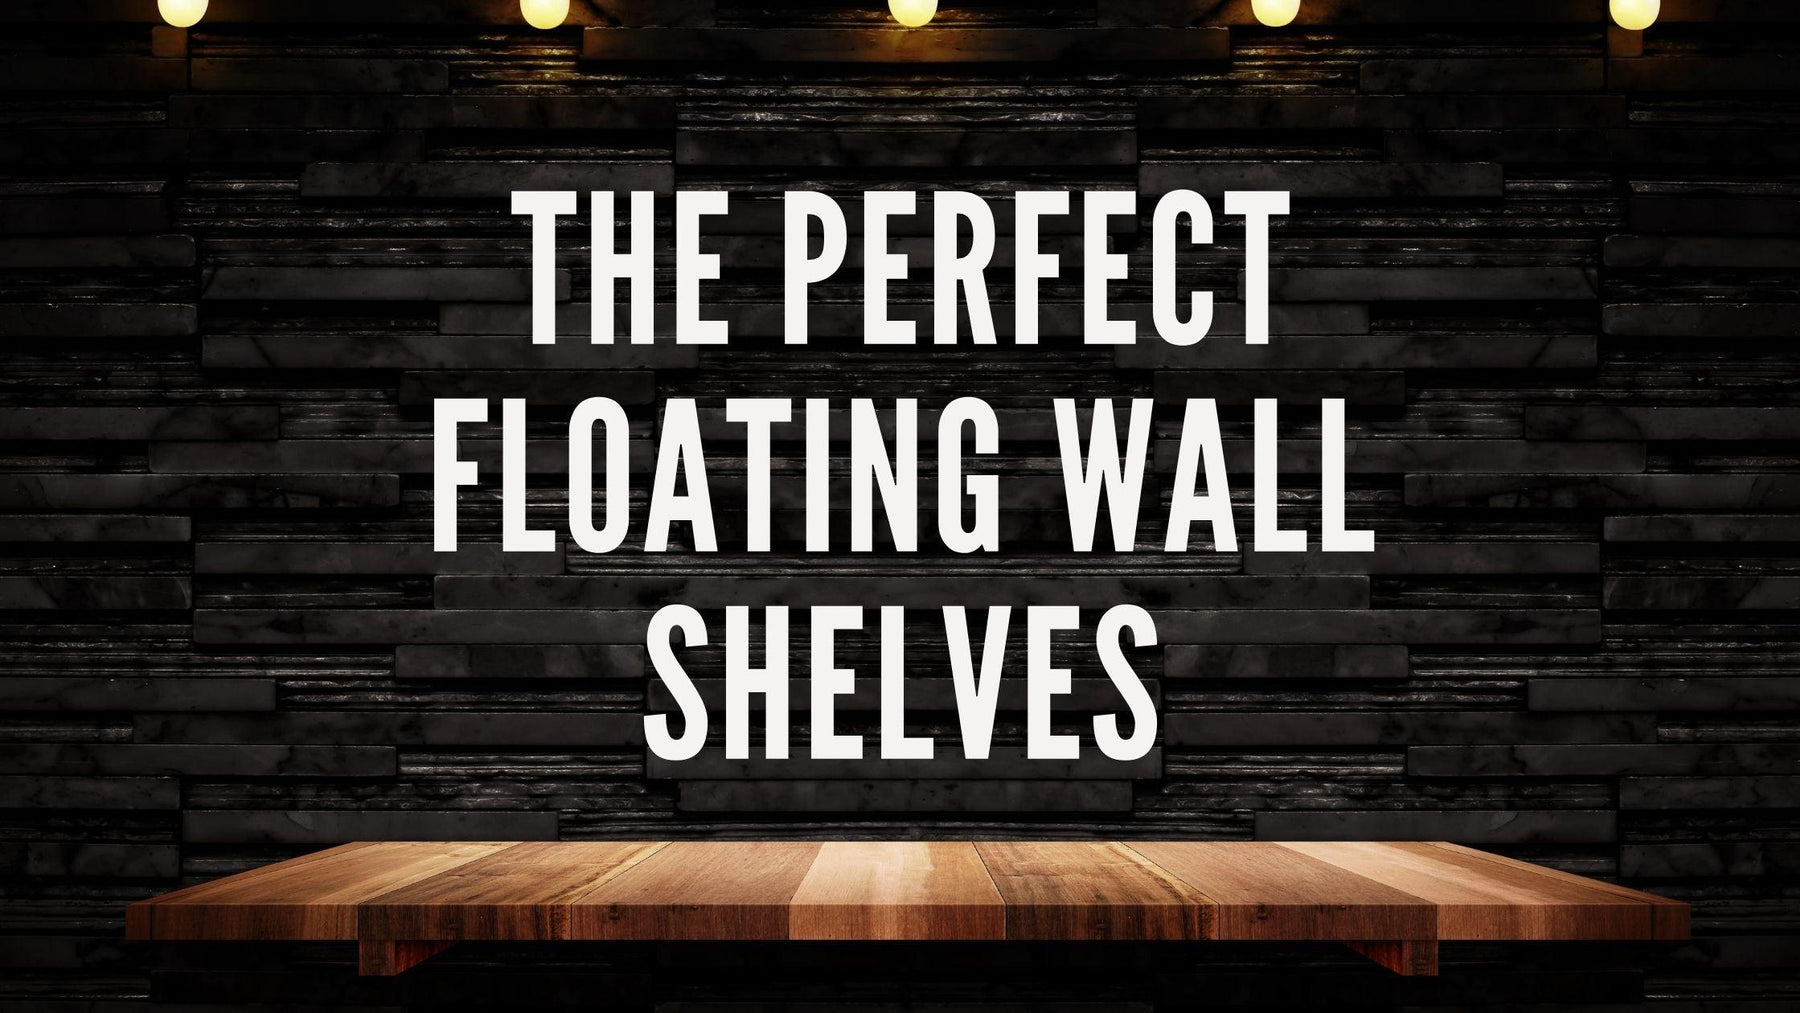 The Perfect Floating Wall Shelves that You Can't-Miss! - WoodenTwist